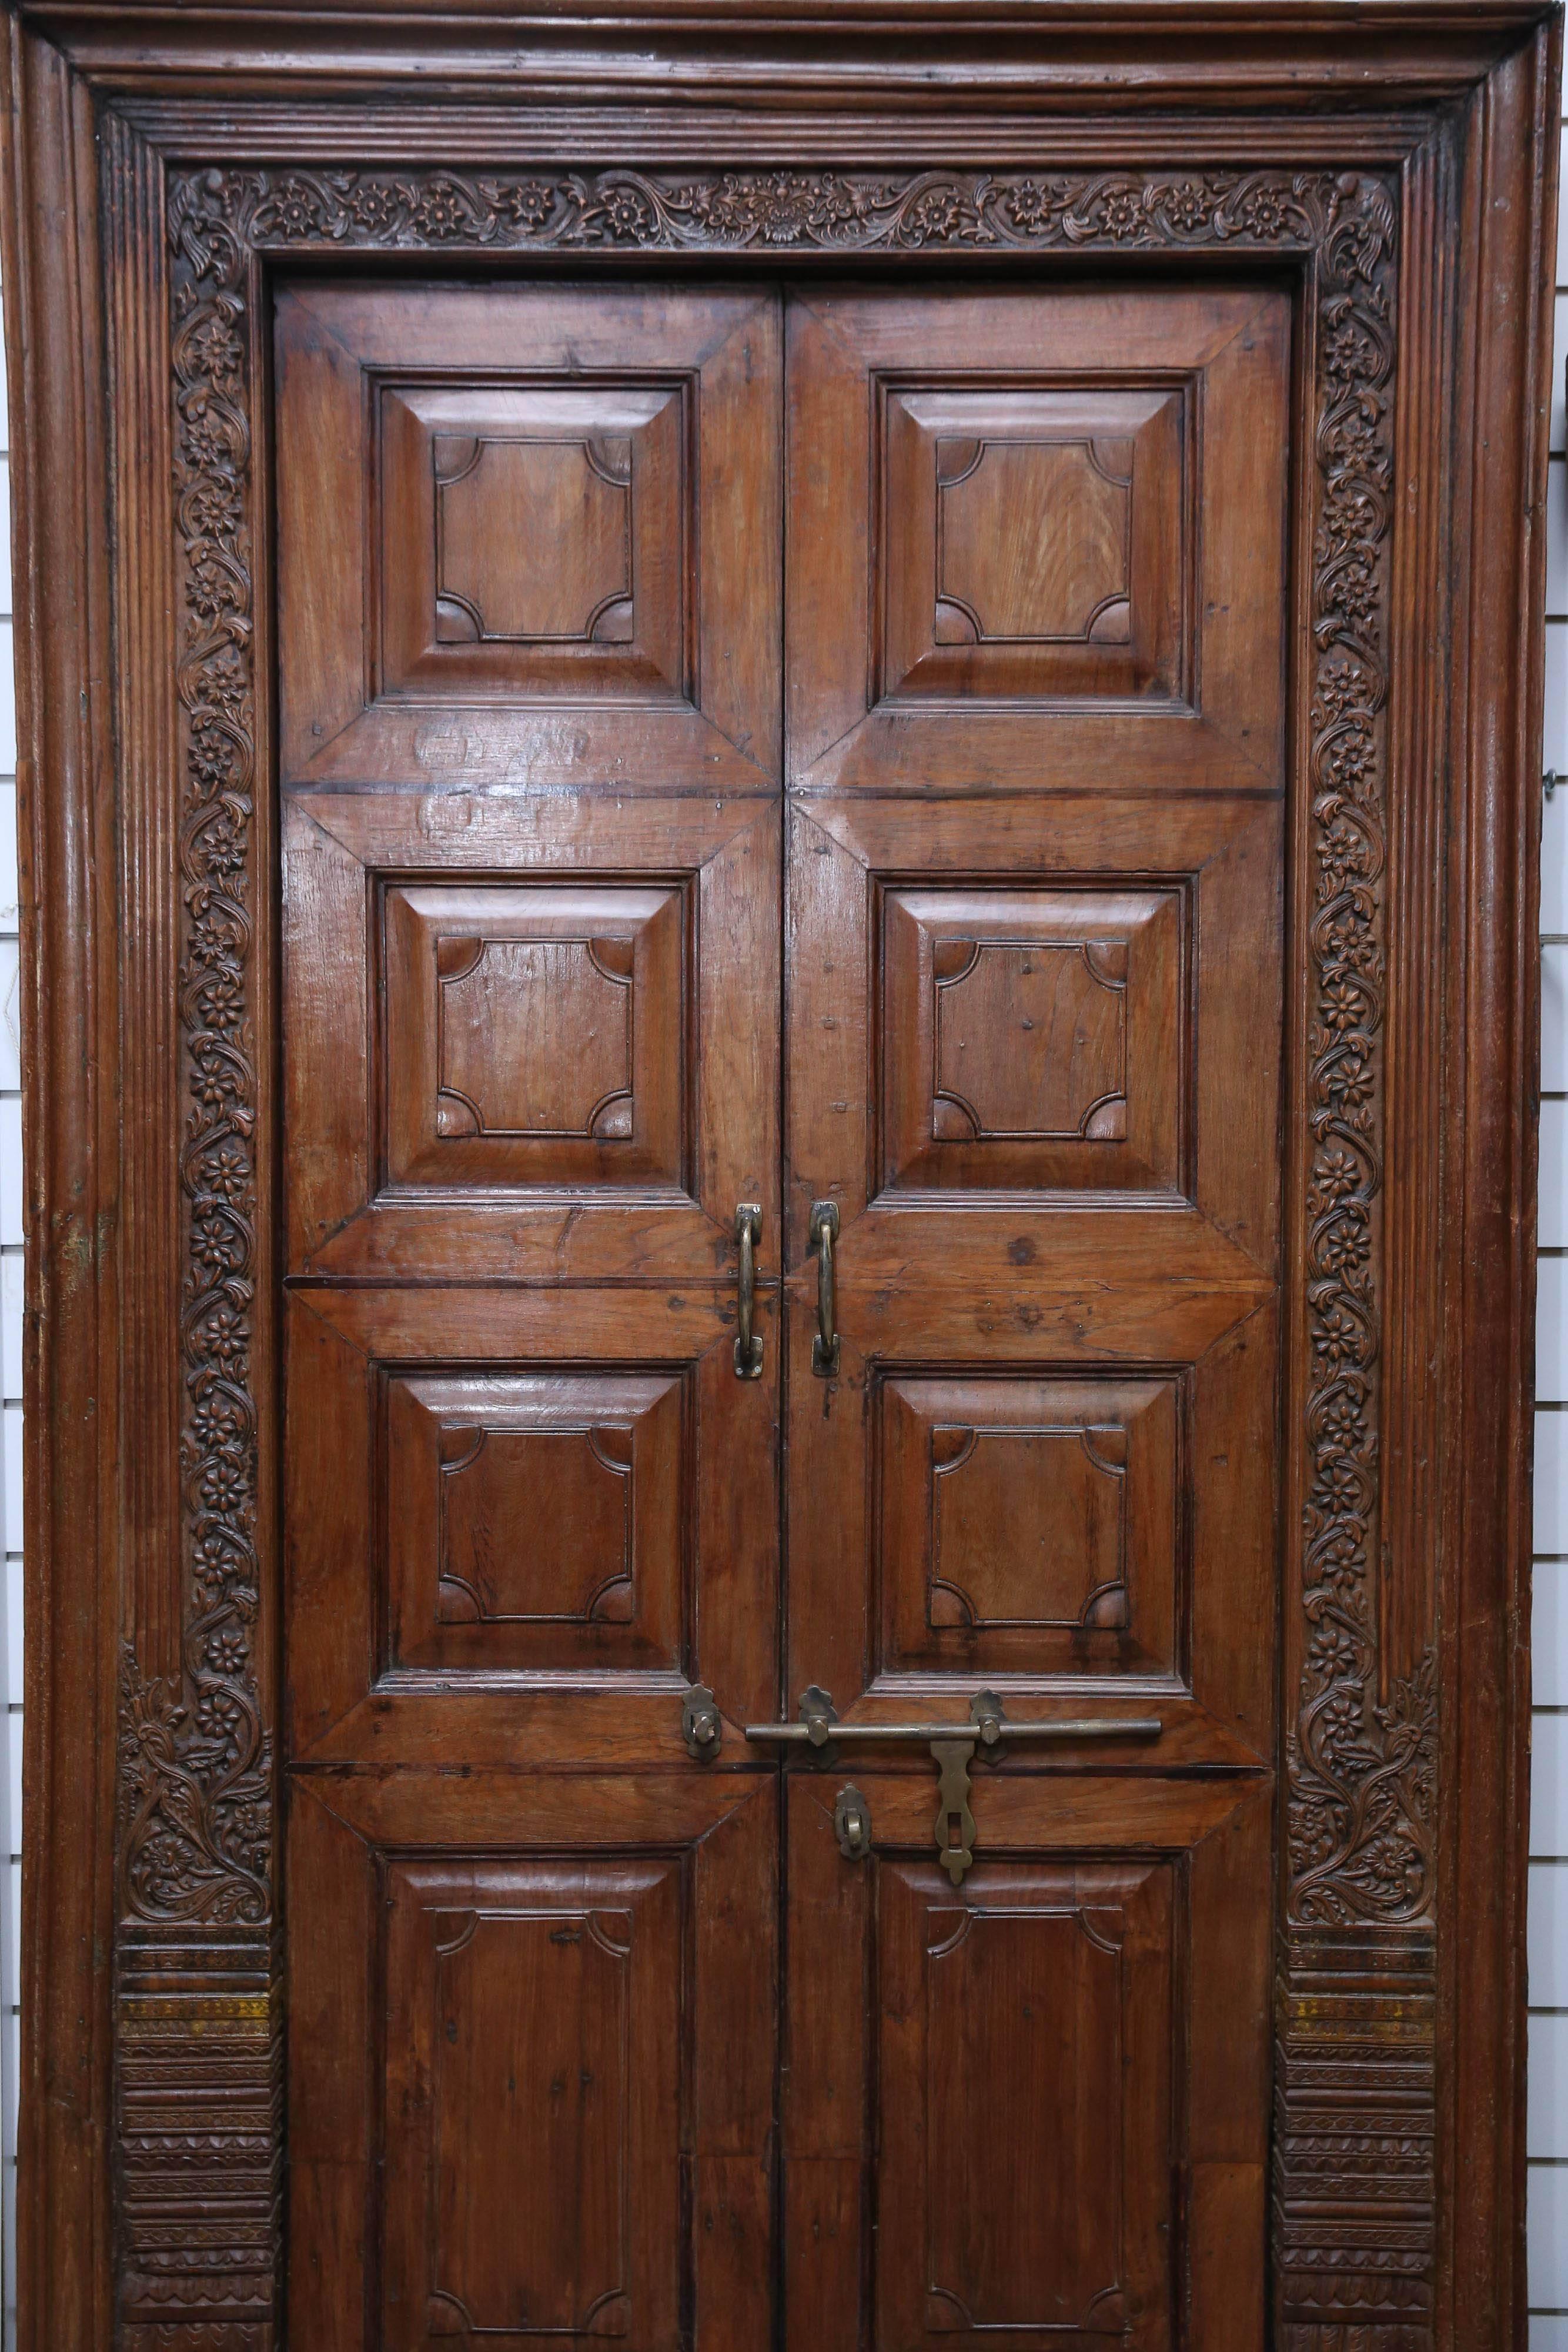 Third Quarter of the 19th Century Solid Teak Wood Superbly Crafted Entry Door In Good Condition For Sale In Houston, TX